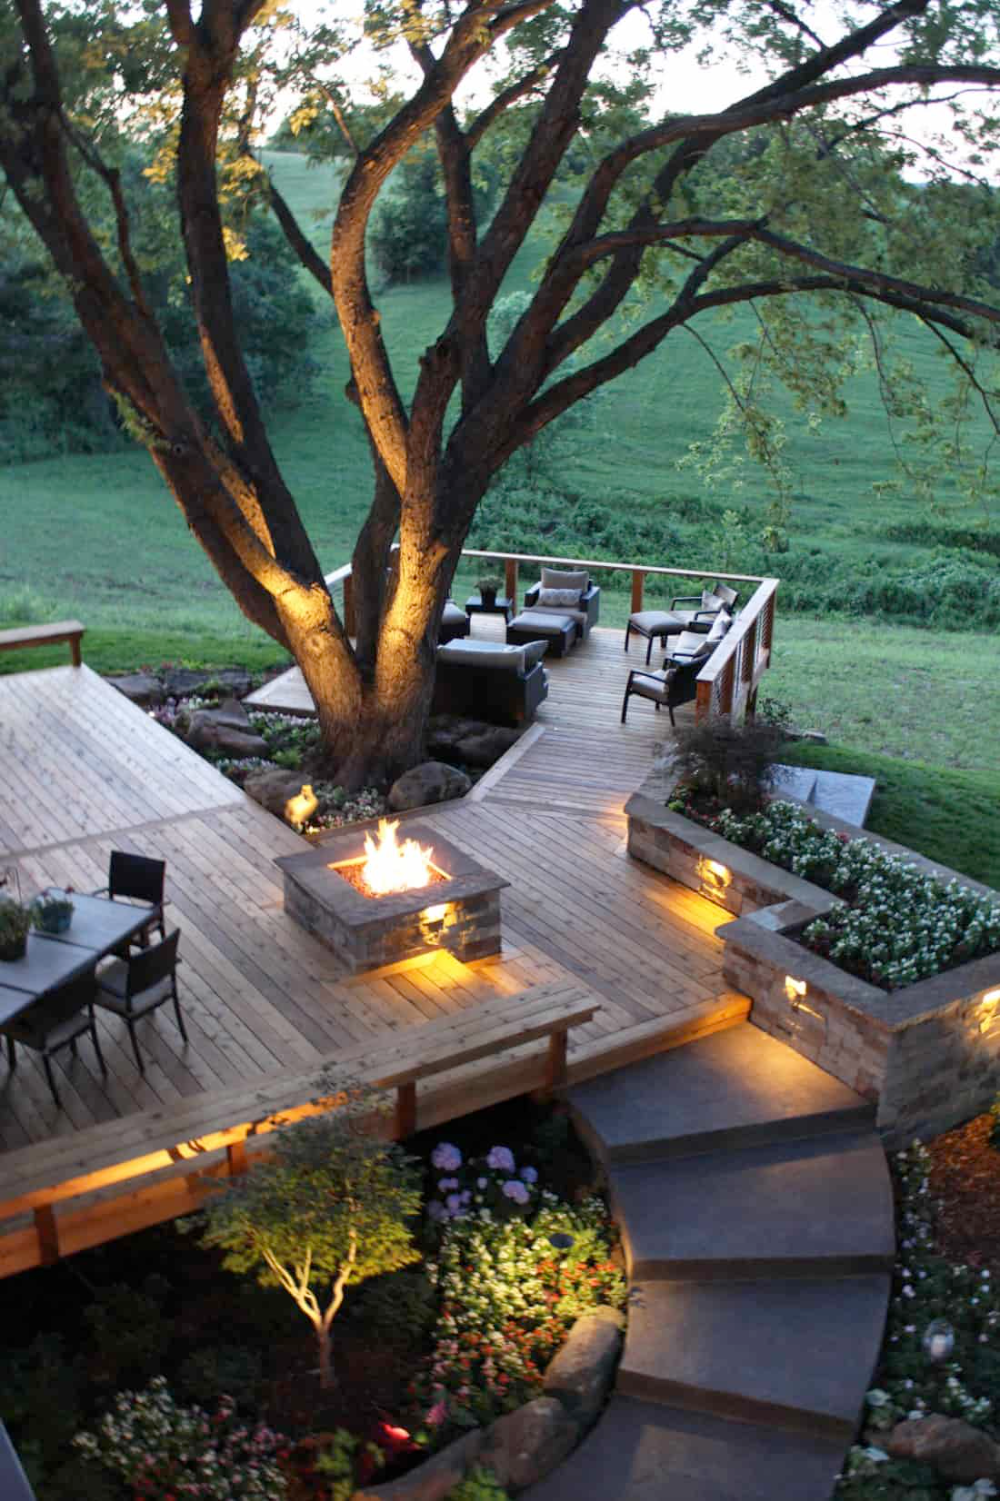 Creative Ways to Transform Your Outdoor Space with Deck Designs